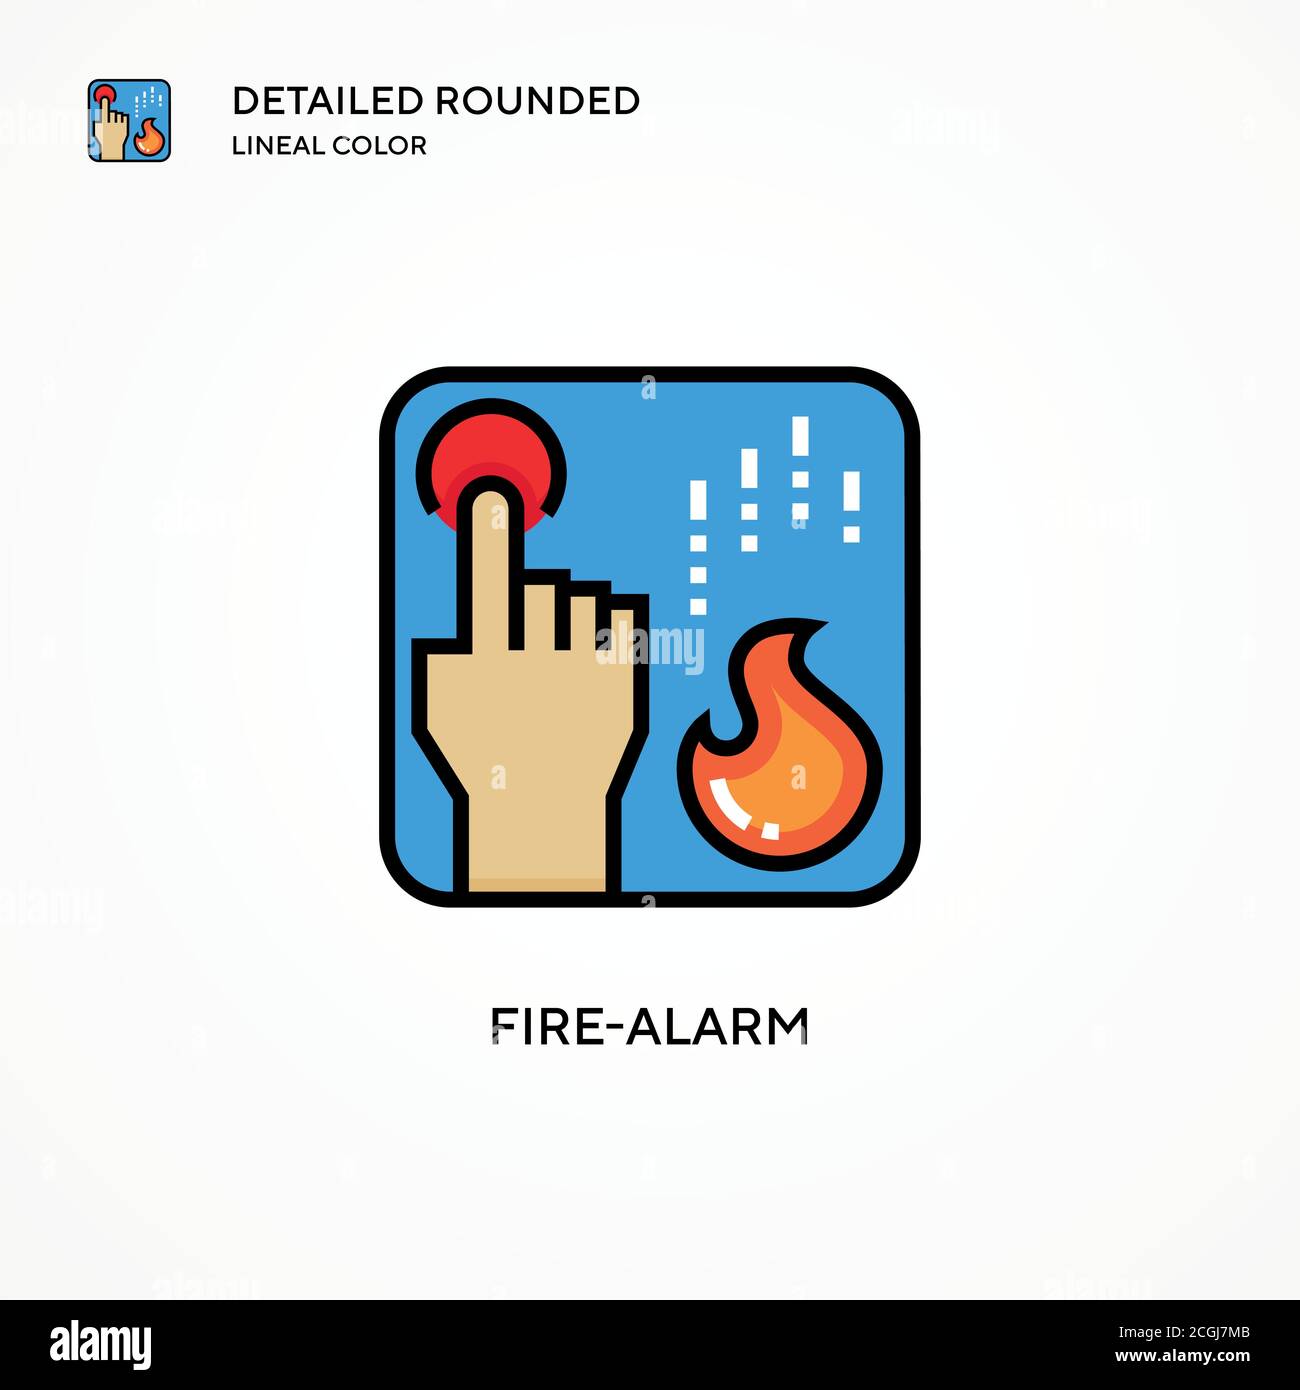 Fire-alarm vector icon. Modern vector illustration concepts. Easy to edit and customize. Stock Vector